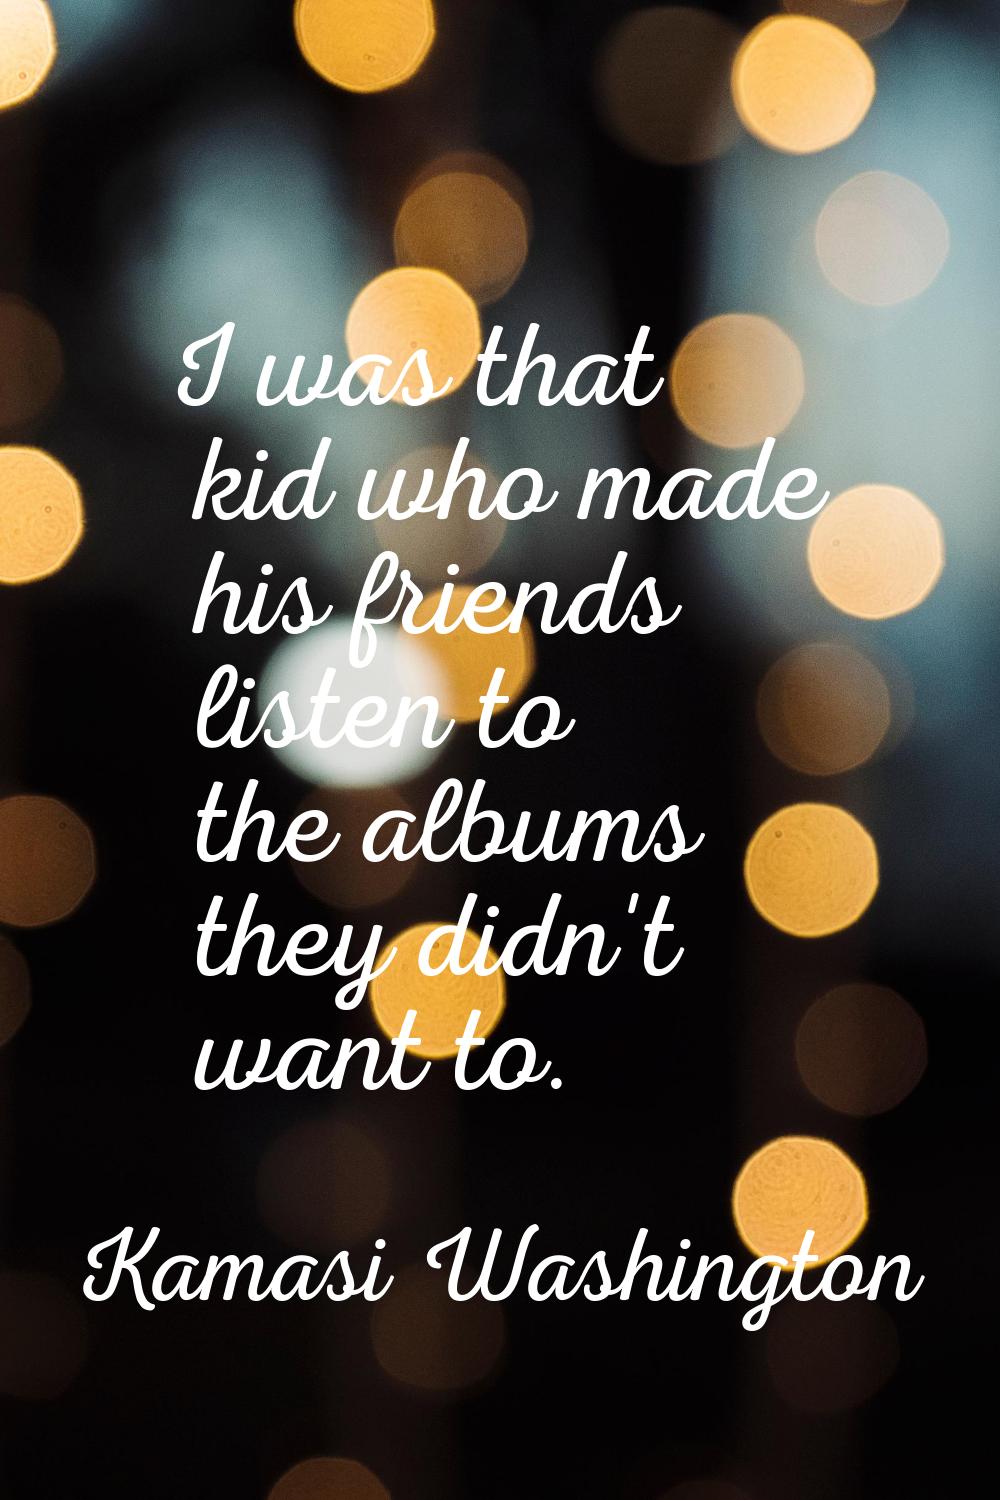 I was that kid who made his friends listen to the albums they didn't want to.